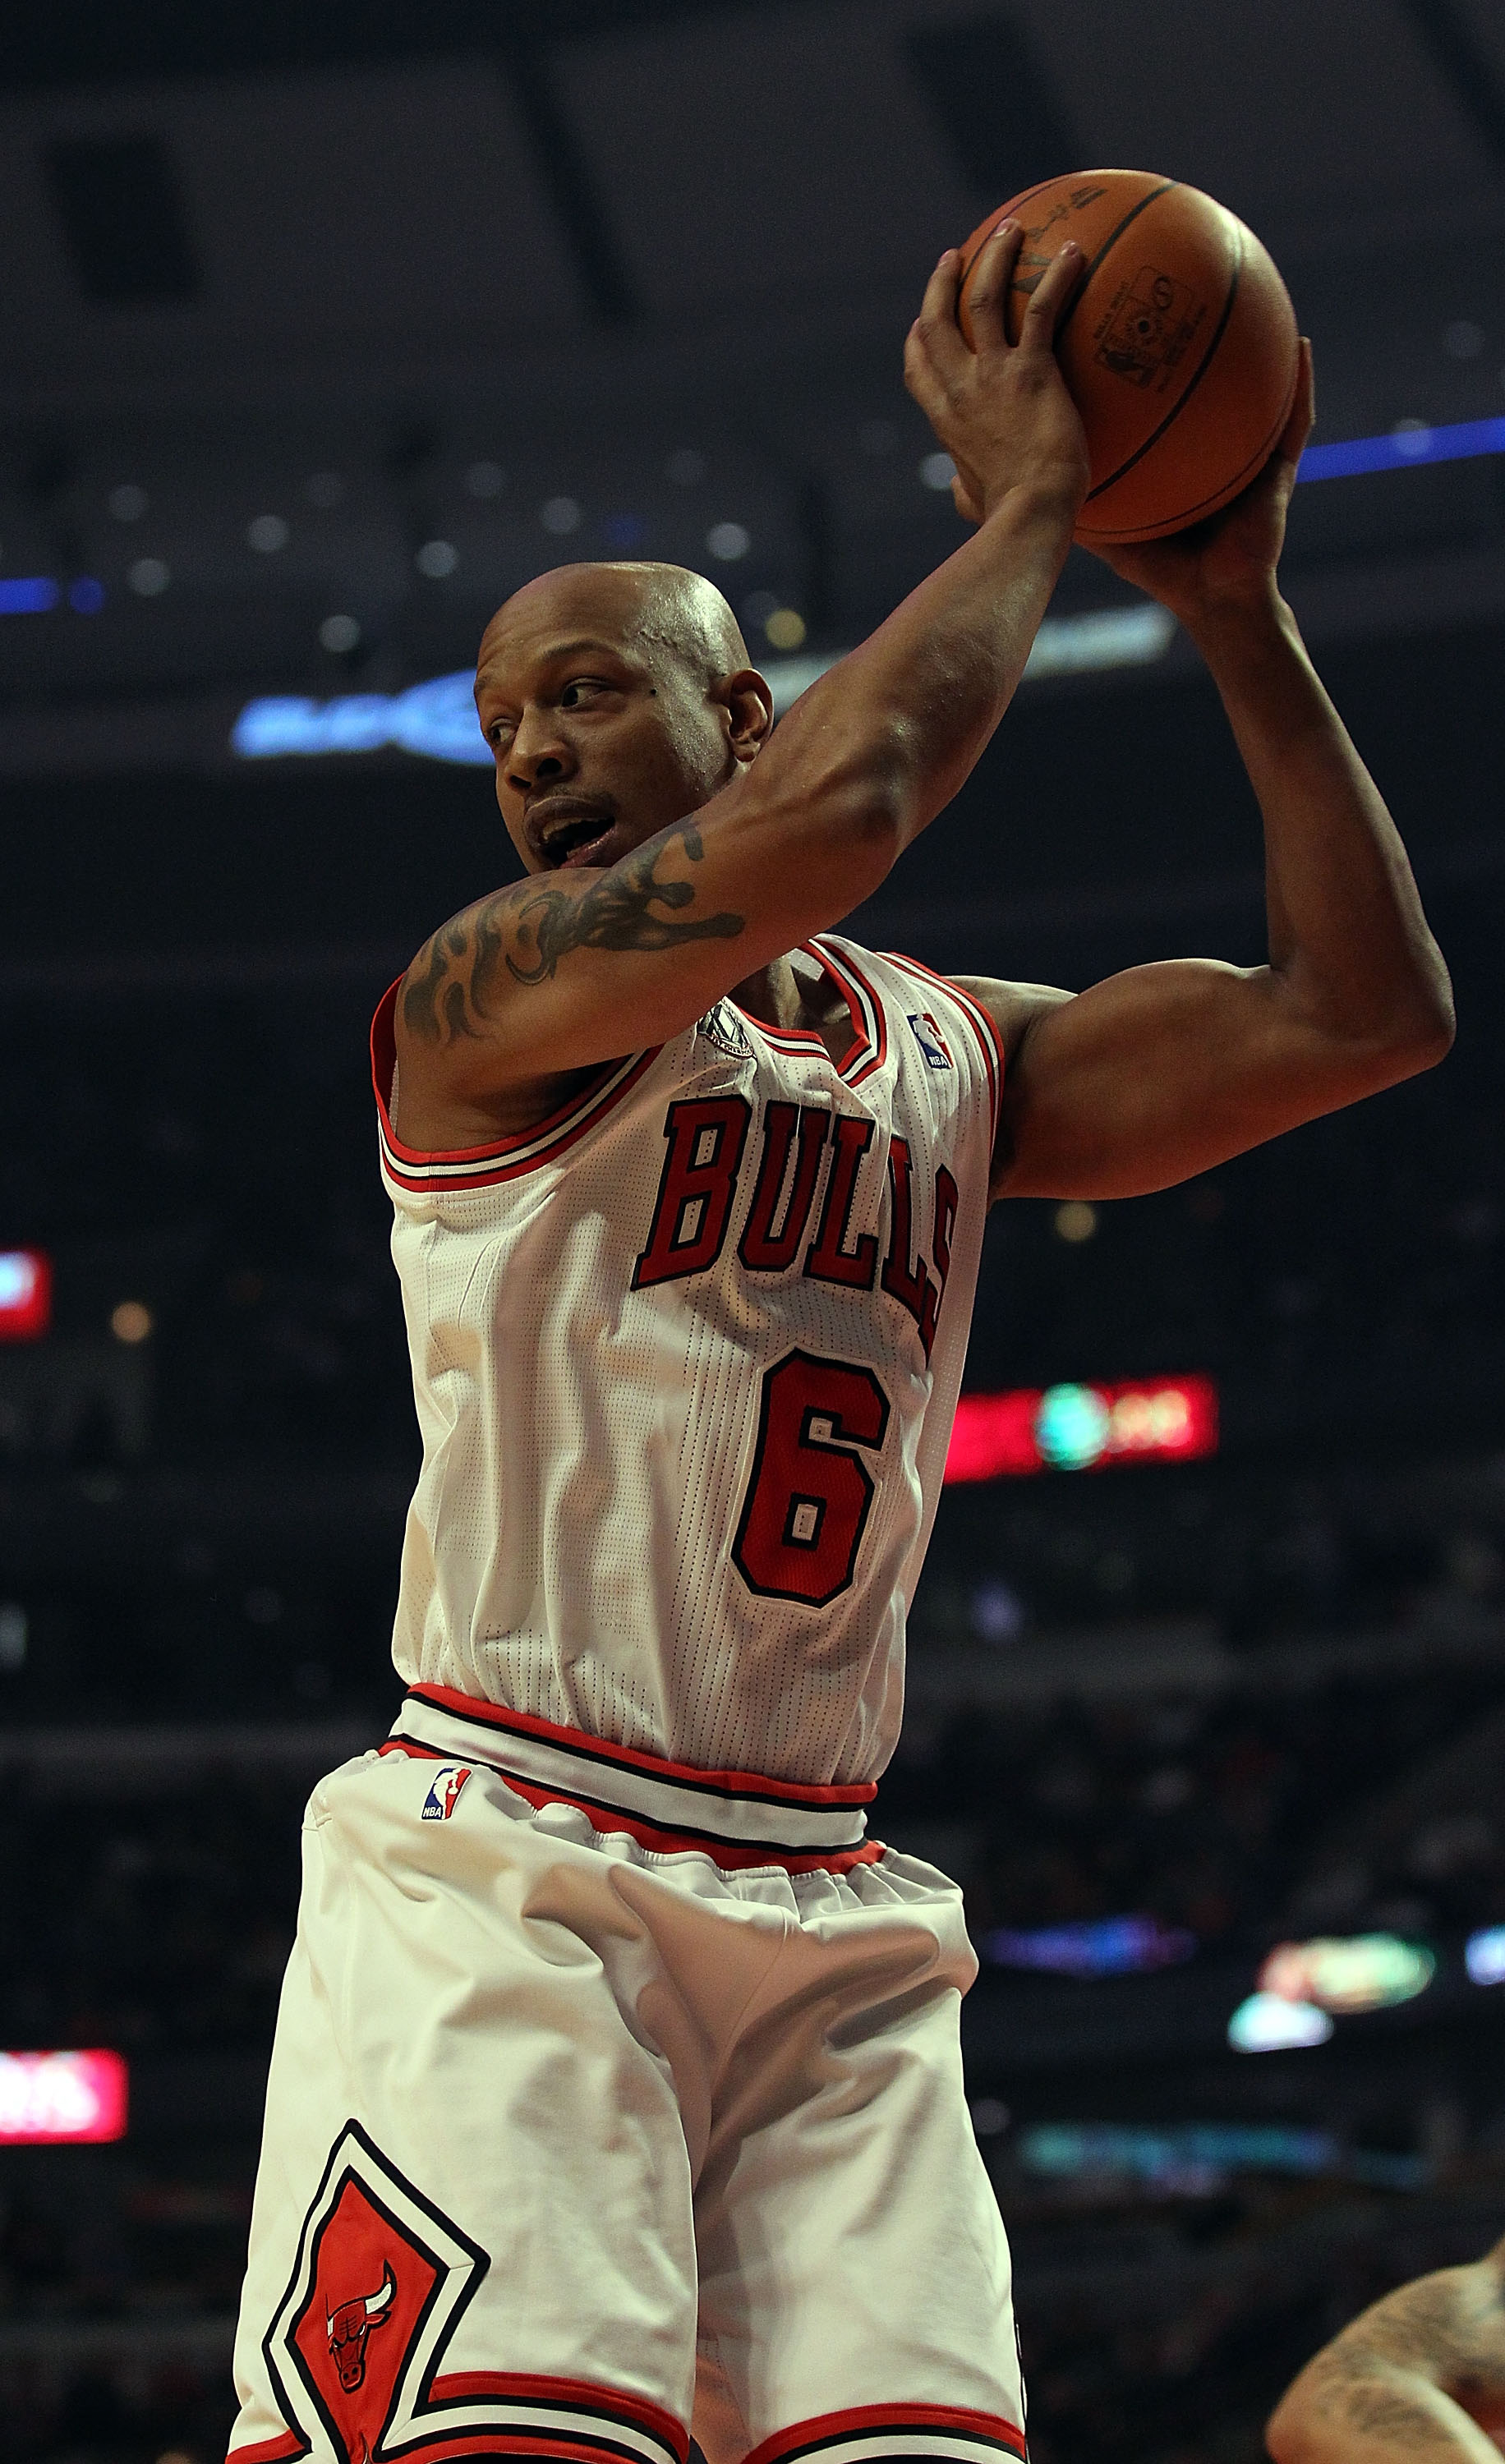 CHICAGO, IL - DECEMBER 21: Keith Bogans #6 of the Chicago Bulls grabs a rebound against the Philadelphia 76ers at the United Center on December 21, 2010 in Chicago, Illinois. The Bulls defeated the 76ers 121-76. NOTE TO USER: User expressly acknowledges a